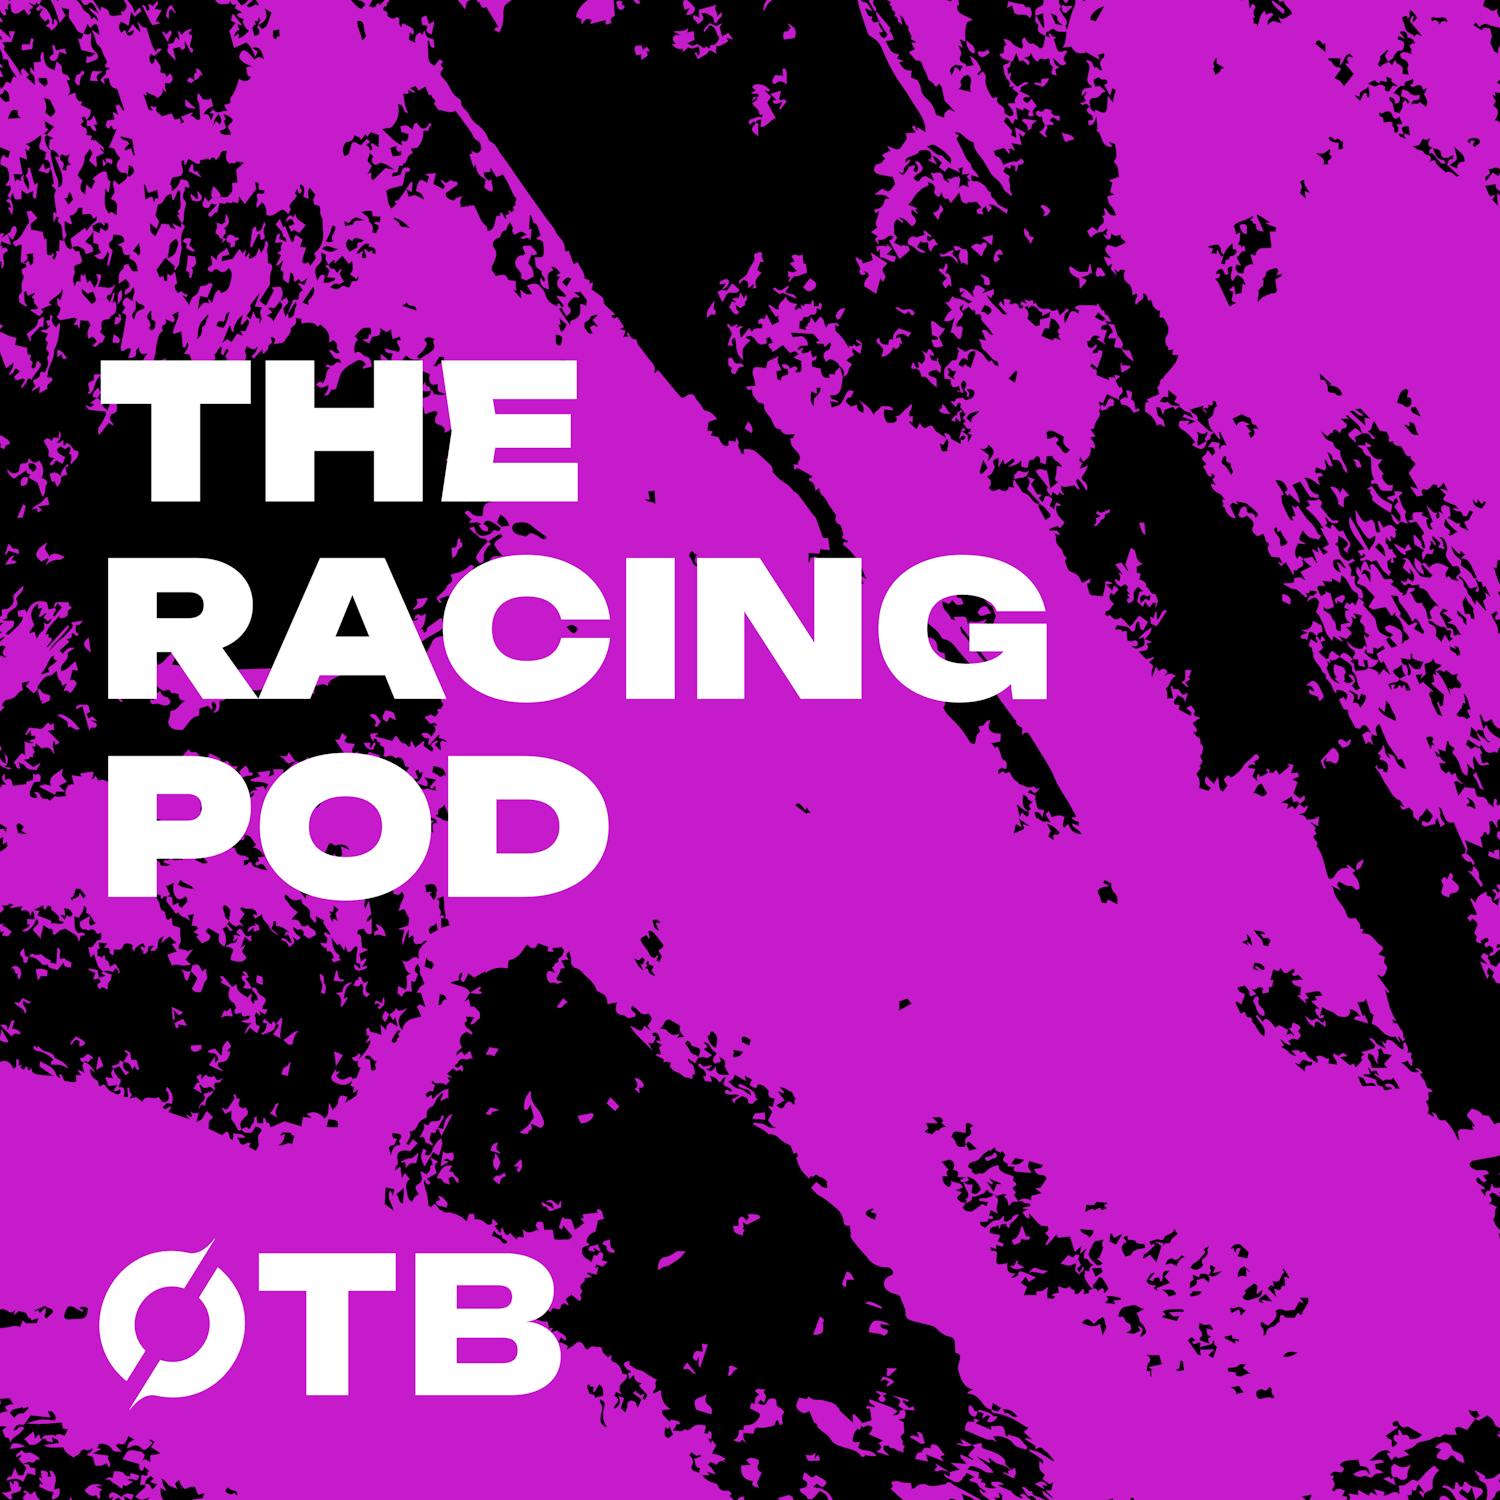 Was the Grand National boring? The way a horse walks | THE RACING POD